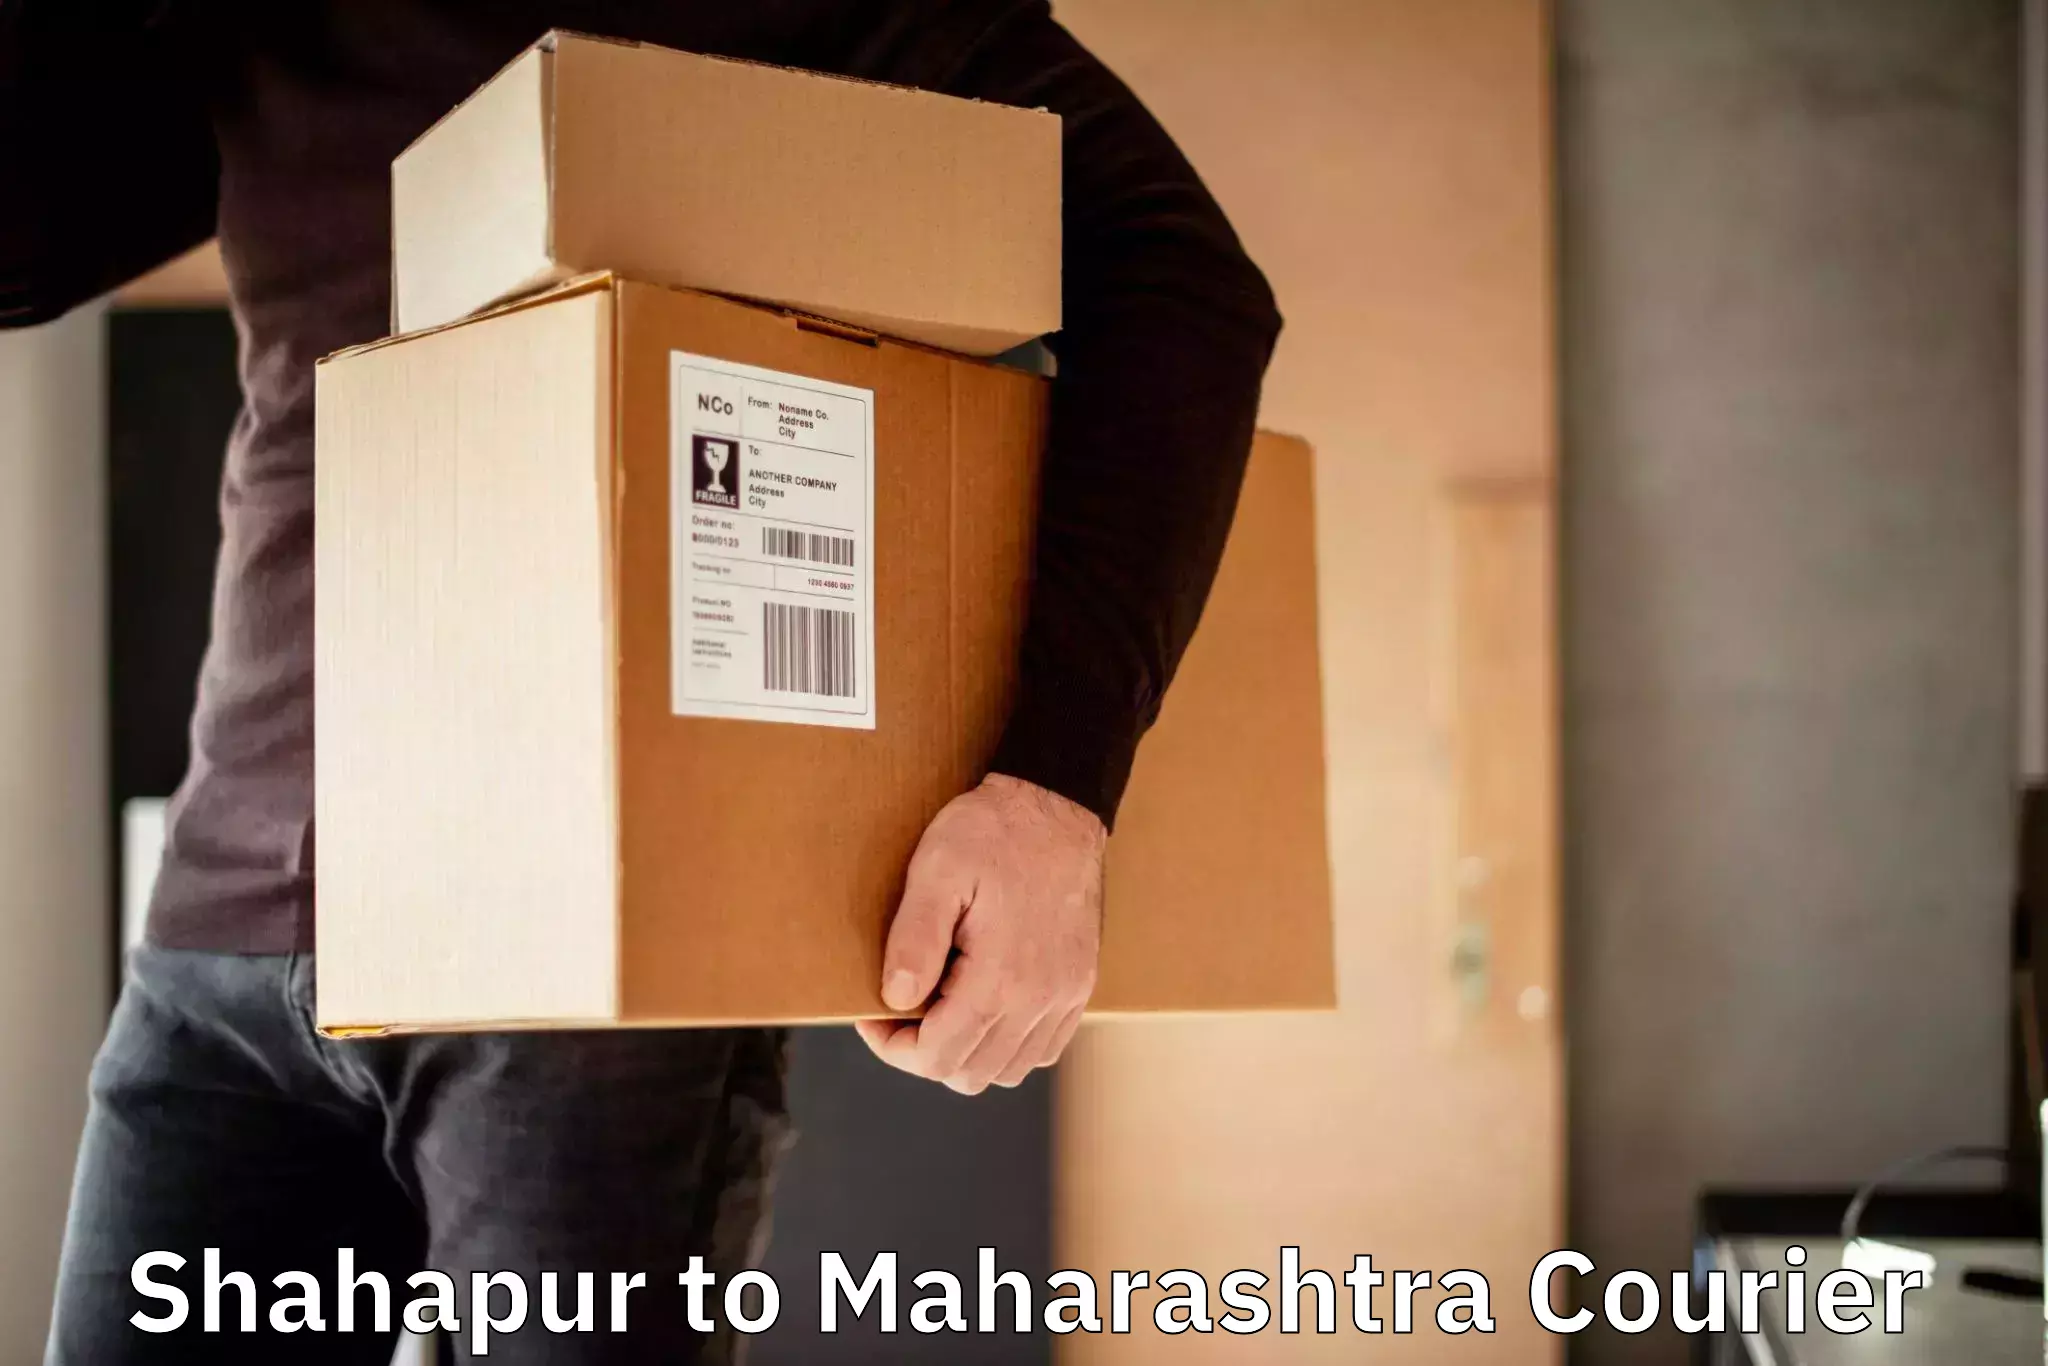 Courier service booking Shahapur to Sangola